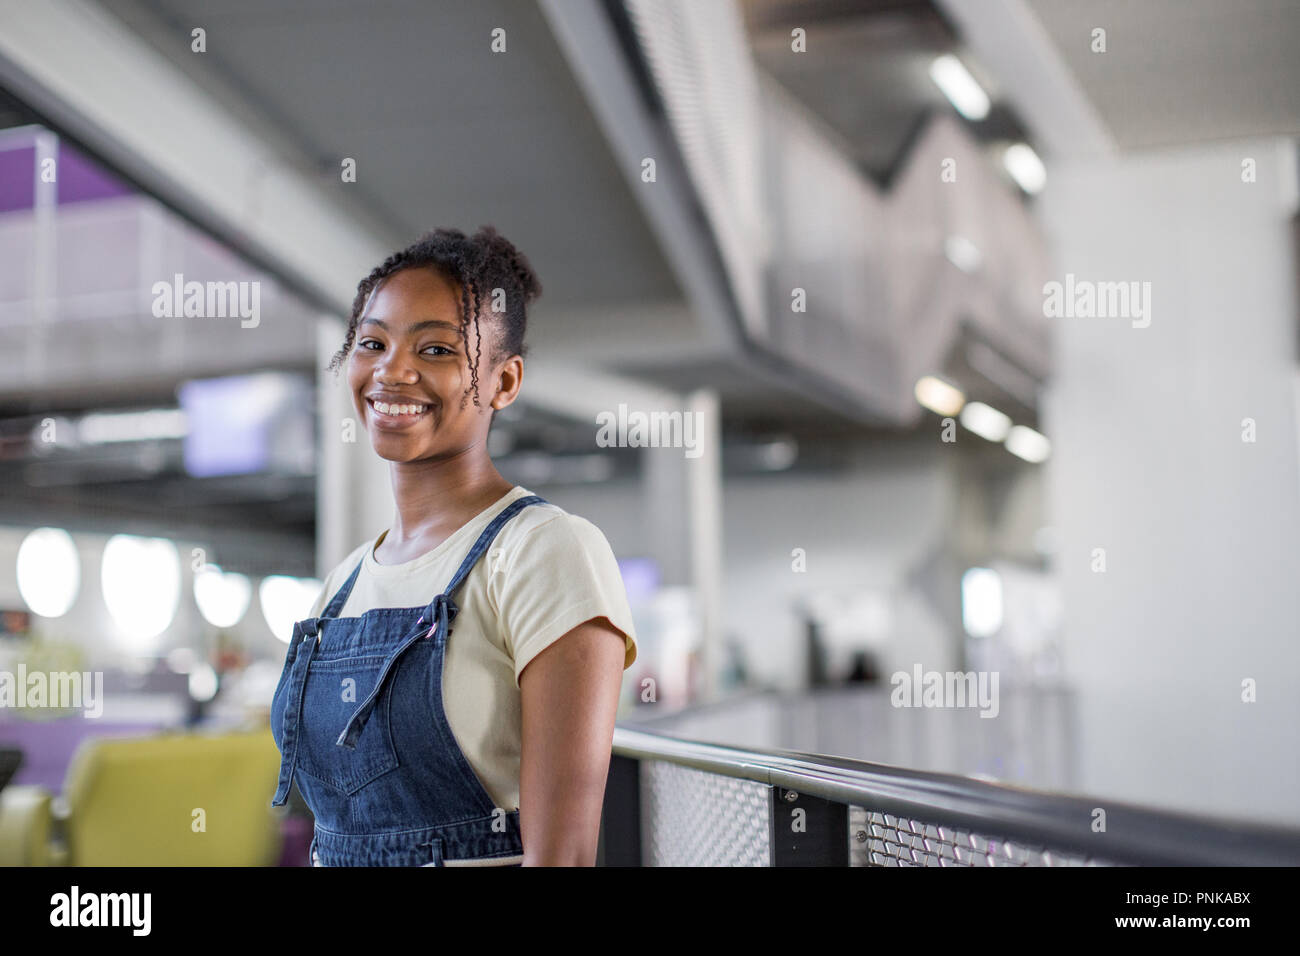 Portrait of African American female student Stock Photo